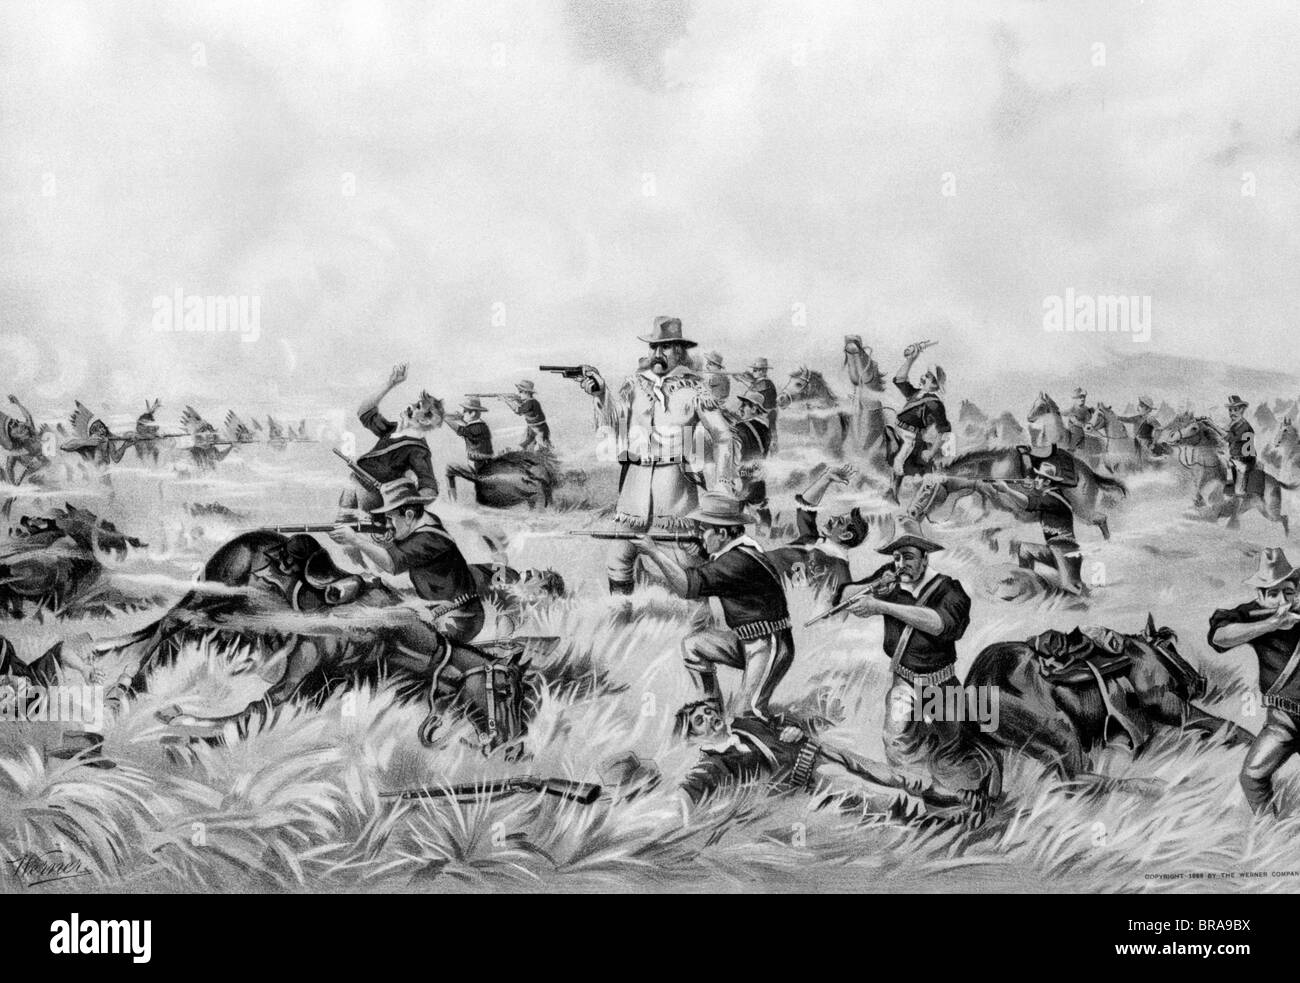 1800S 1870S 25. JUNI 1876 GENERAL GEORGE ARMSTRONG CUSTER'S LAST STAND IN SCHLACHT AM LITTLE BIG HORN Stockfoto